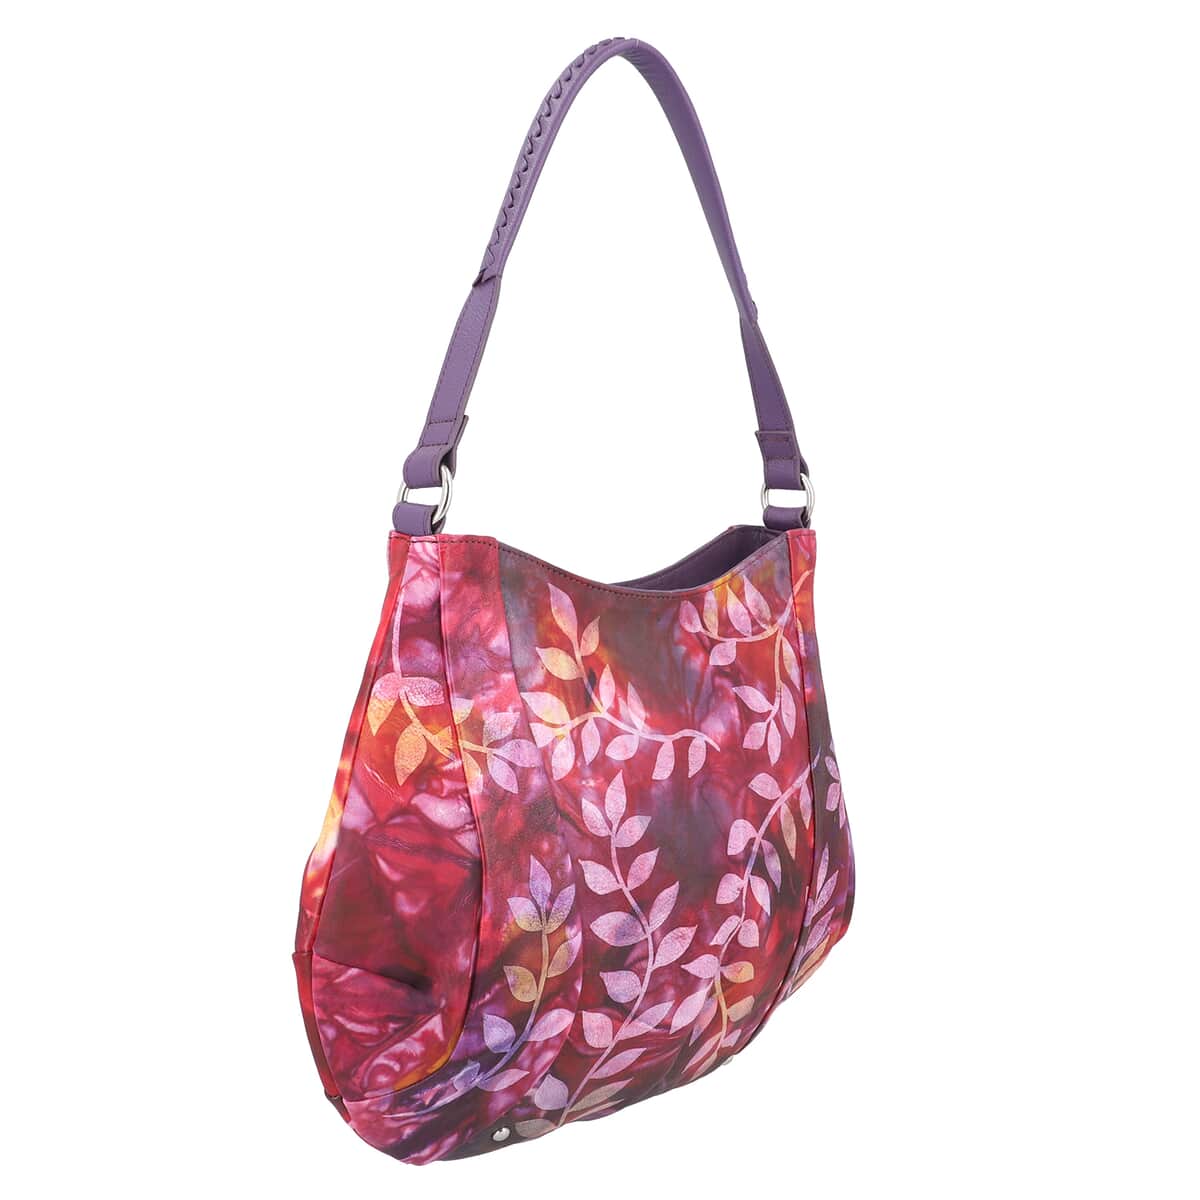 "SUKRITI 100% Genuine Leather Hobo Bag Theme: Tie Dye Color: Purple Size: 14.56 x 7.6 x 9 inches" image number 2